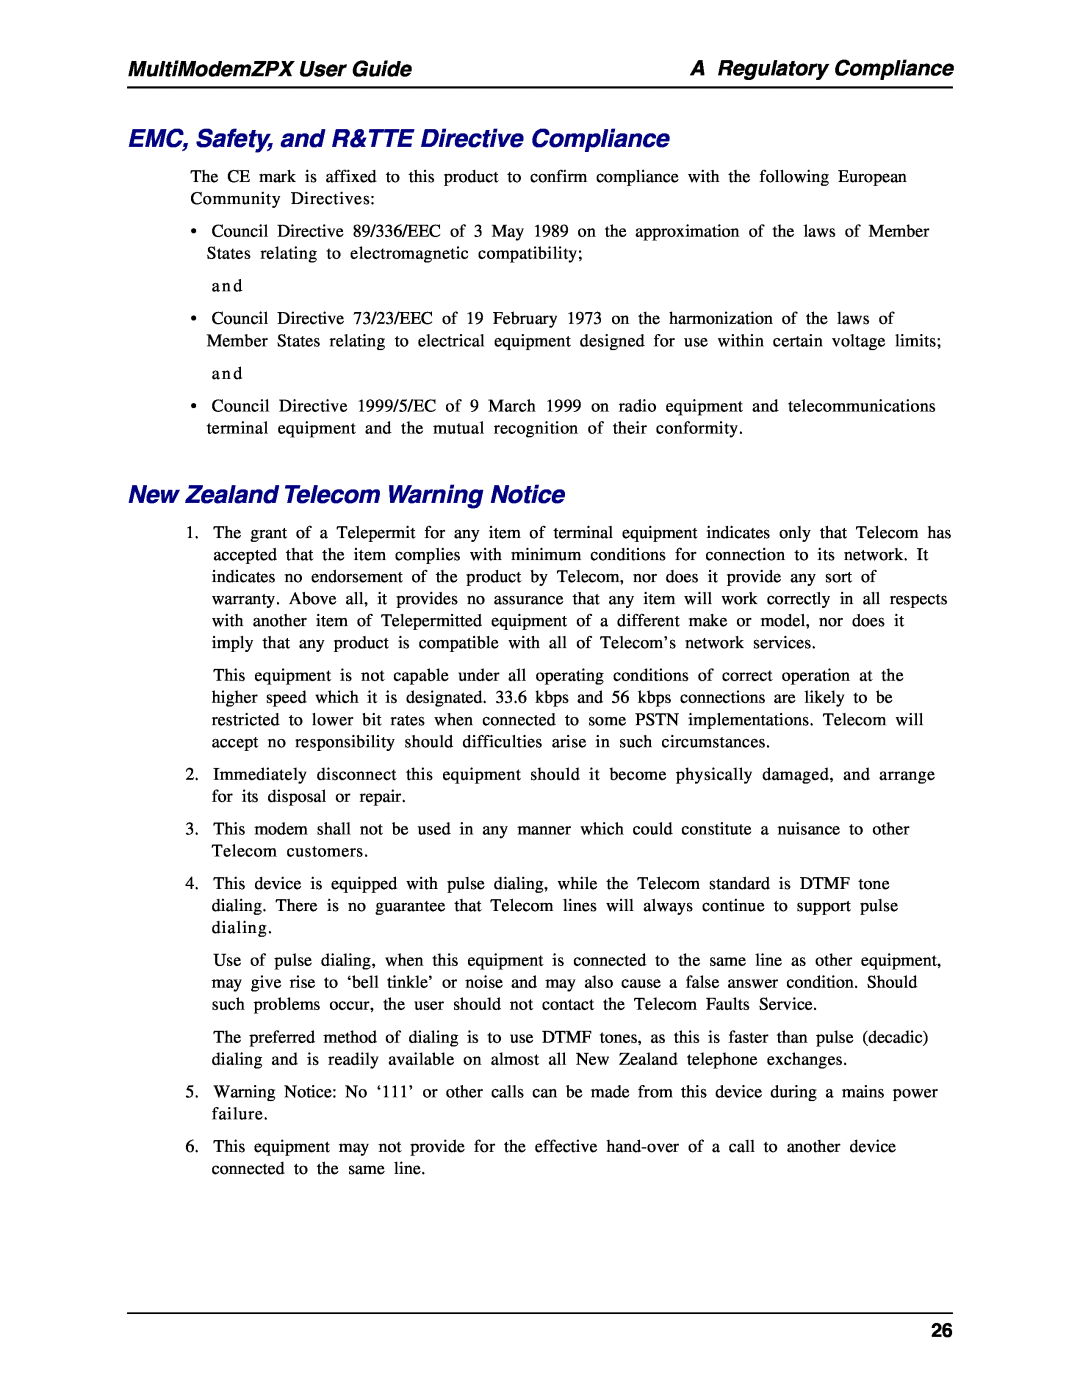 Multi-Tech Systems MT5634ZPX-PCI-U manual EMC, Safety, and R&TTE Directive Compliance, New Zealand Telecom Warning Notice 